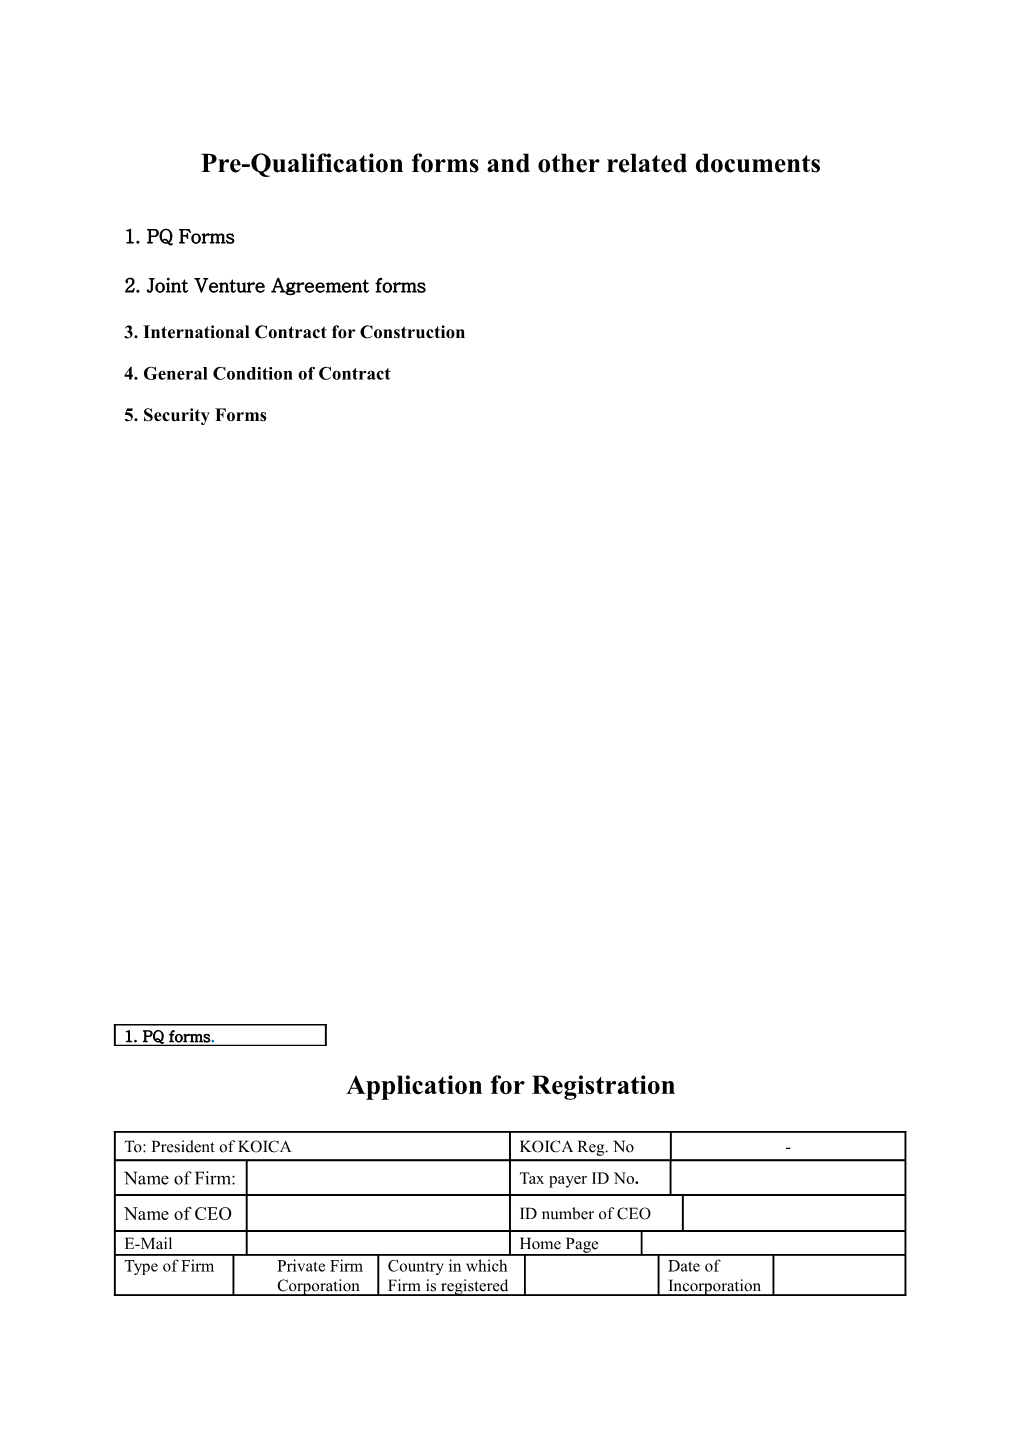 Pre-Qualification Forms and Other Related Documents